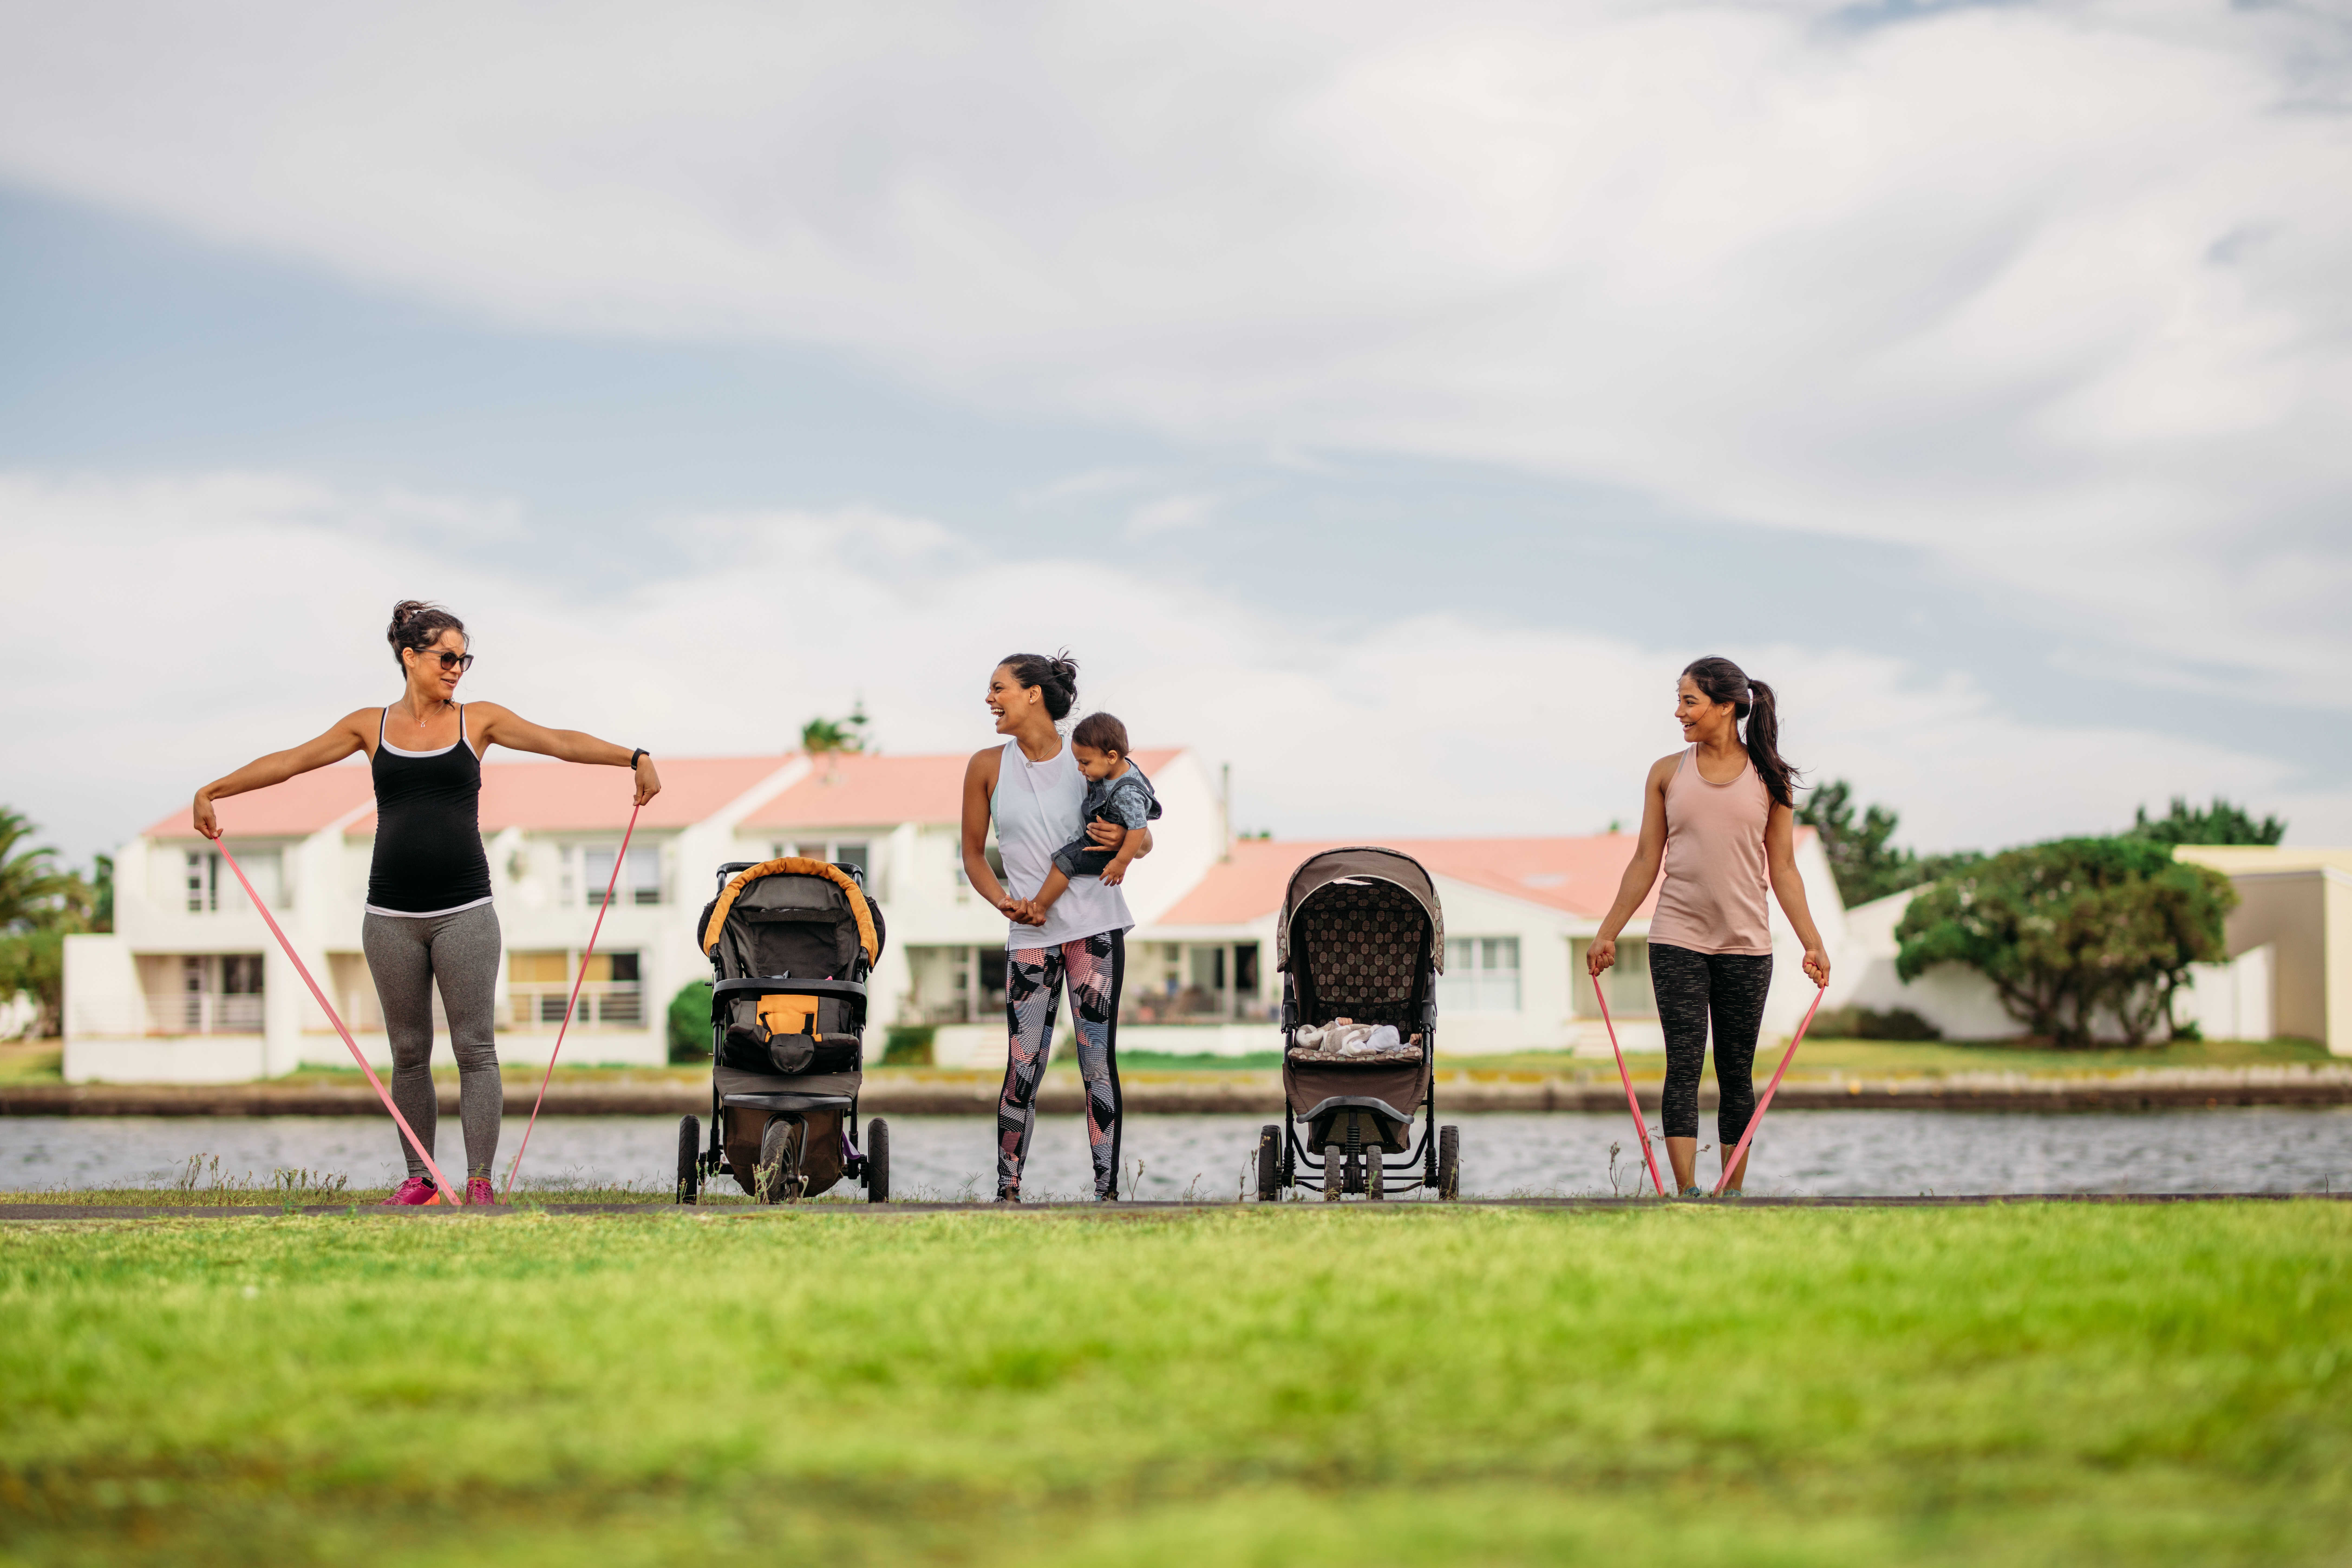 Mothers with strollers work out in the park